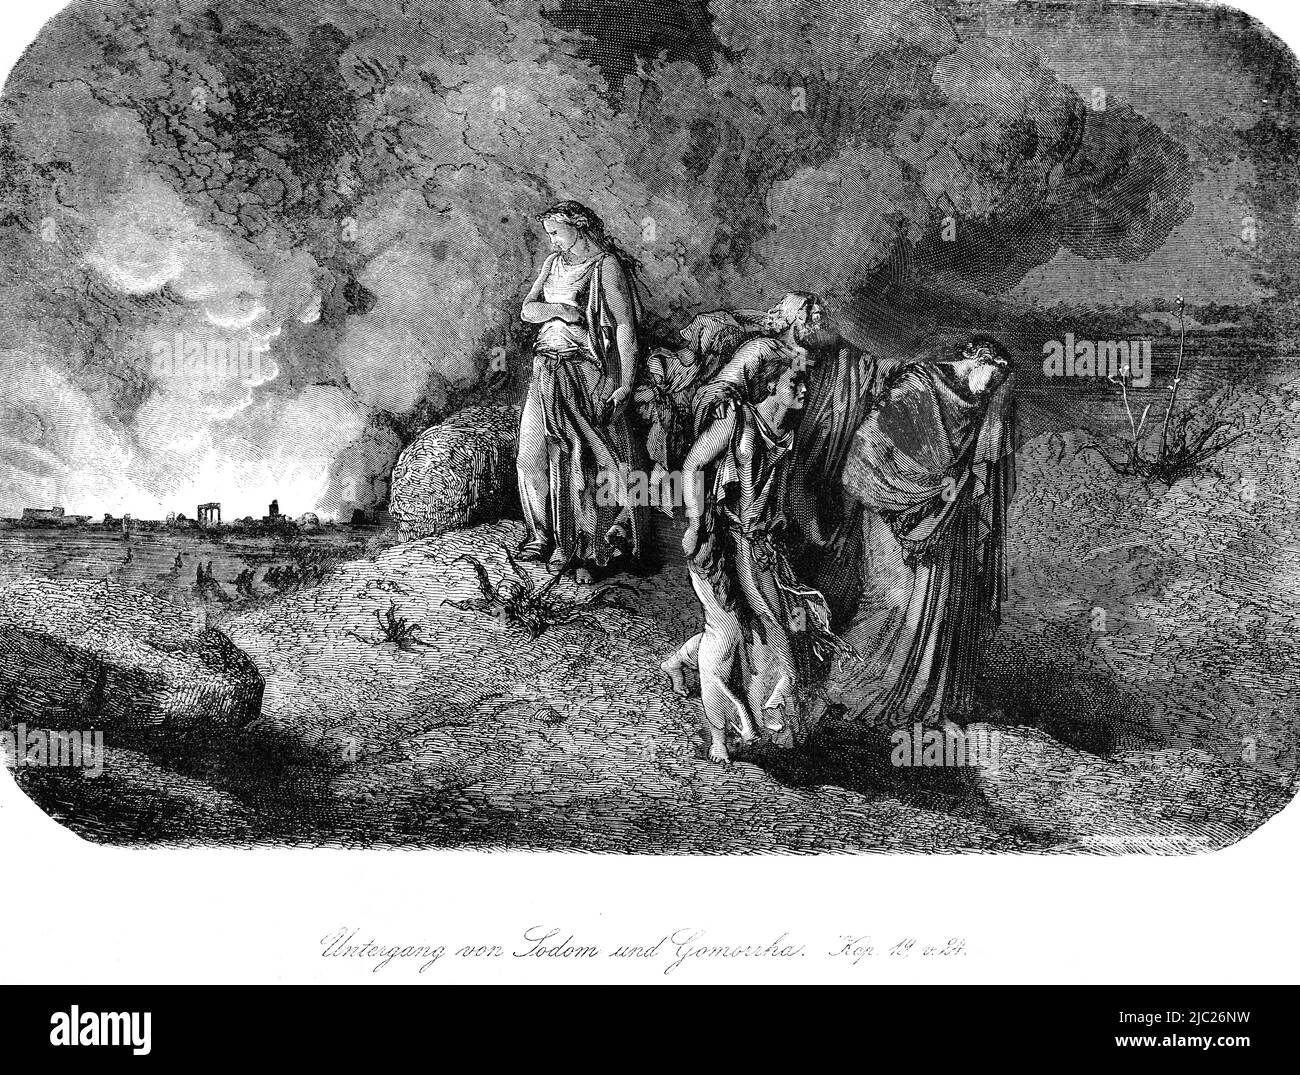 Sodom and gomorrah Black and White Stock Photos & Images - Alamy